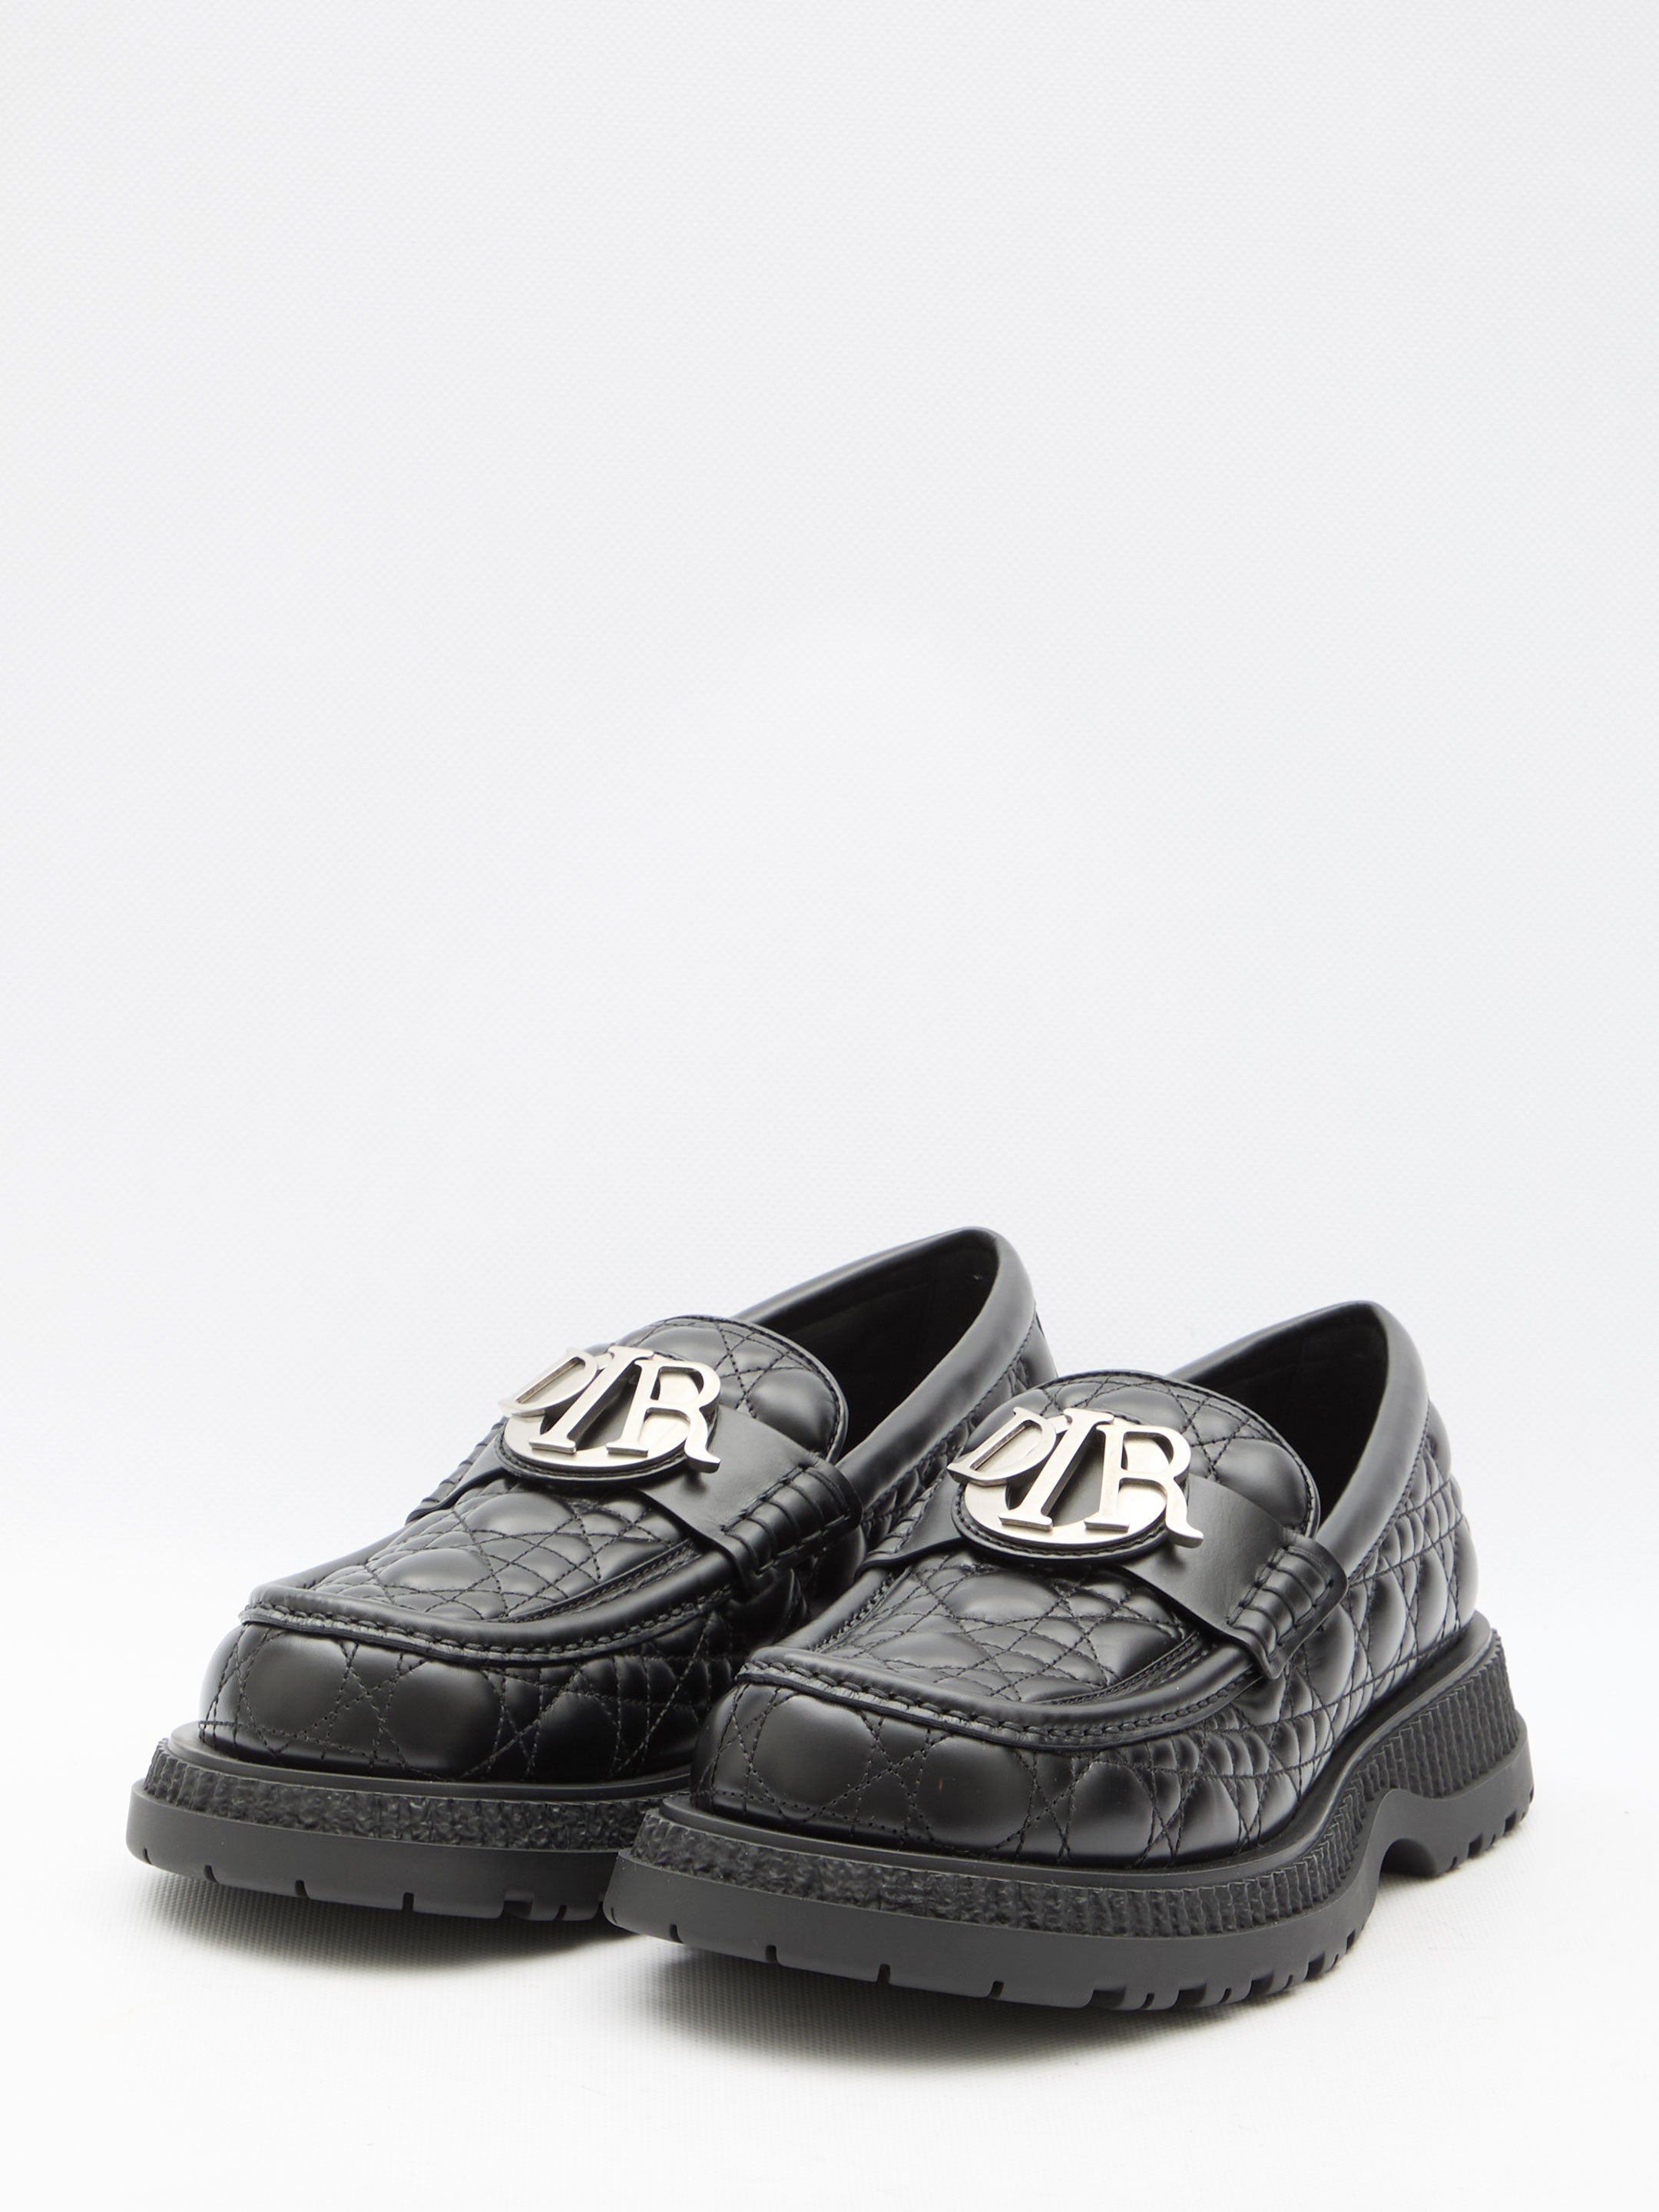 DIOR-HOMME-OUTLET-SALE-Dior-Buffalo-loafers-Flache-Schuhe-ARCHIVE-COLLECTION-2.jpg